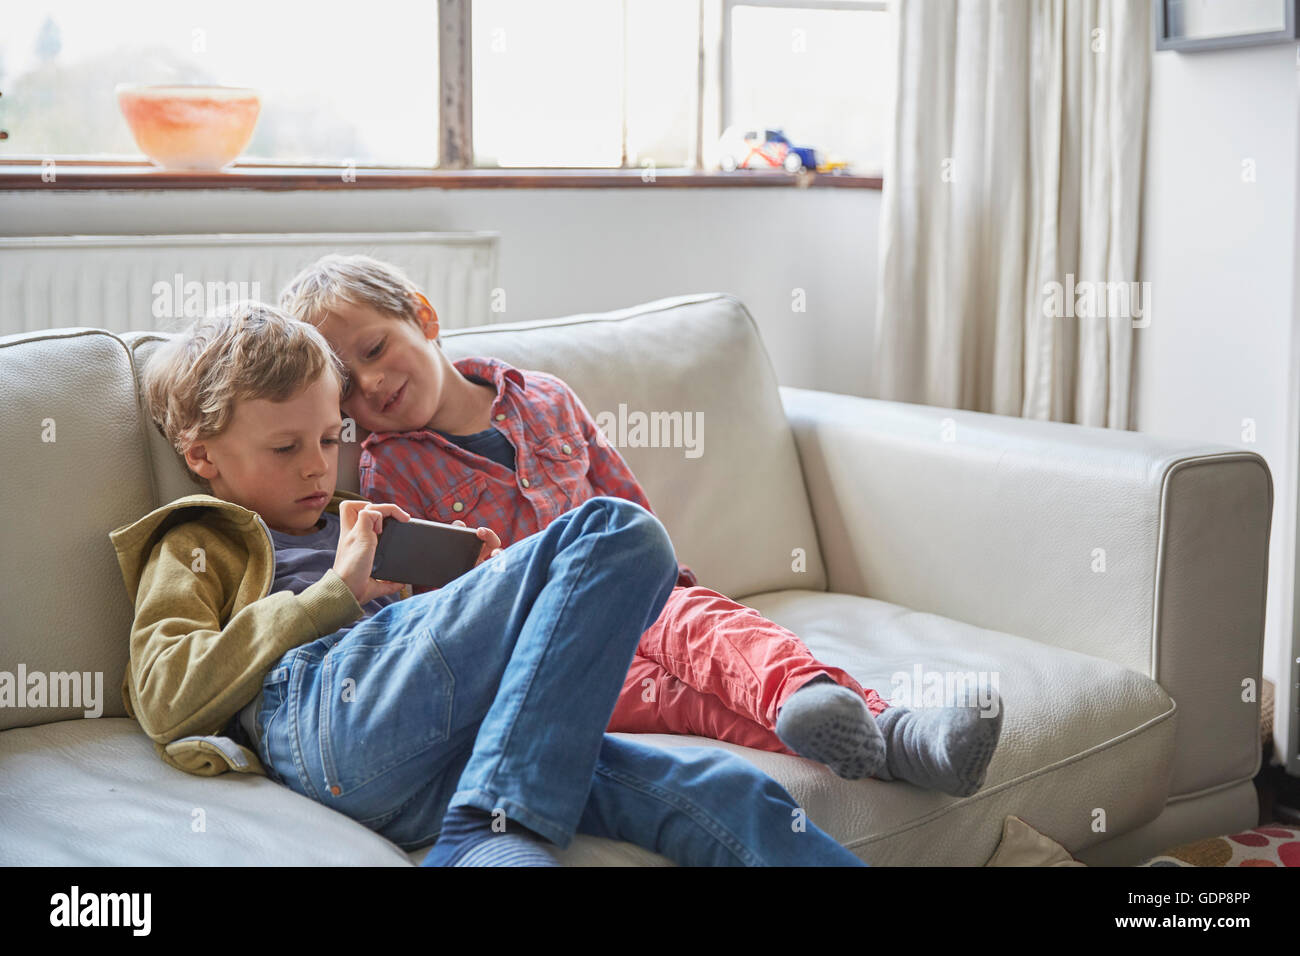 Boys sitting on sofa looking at smartphone Stock Photo